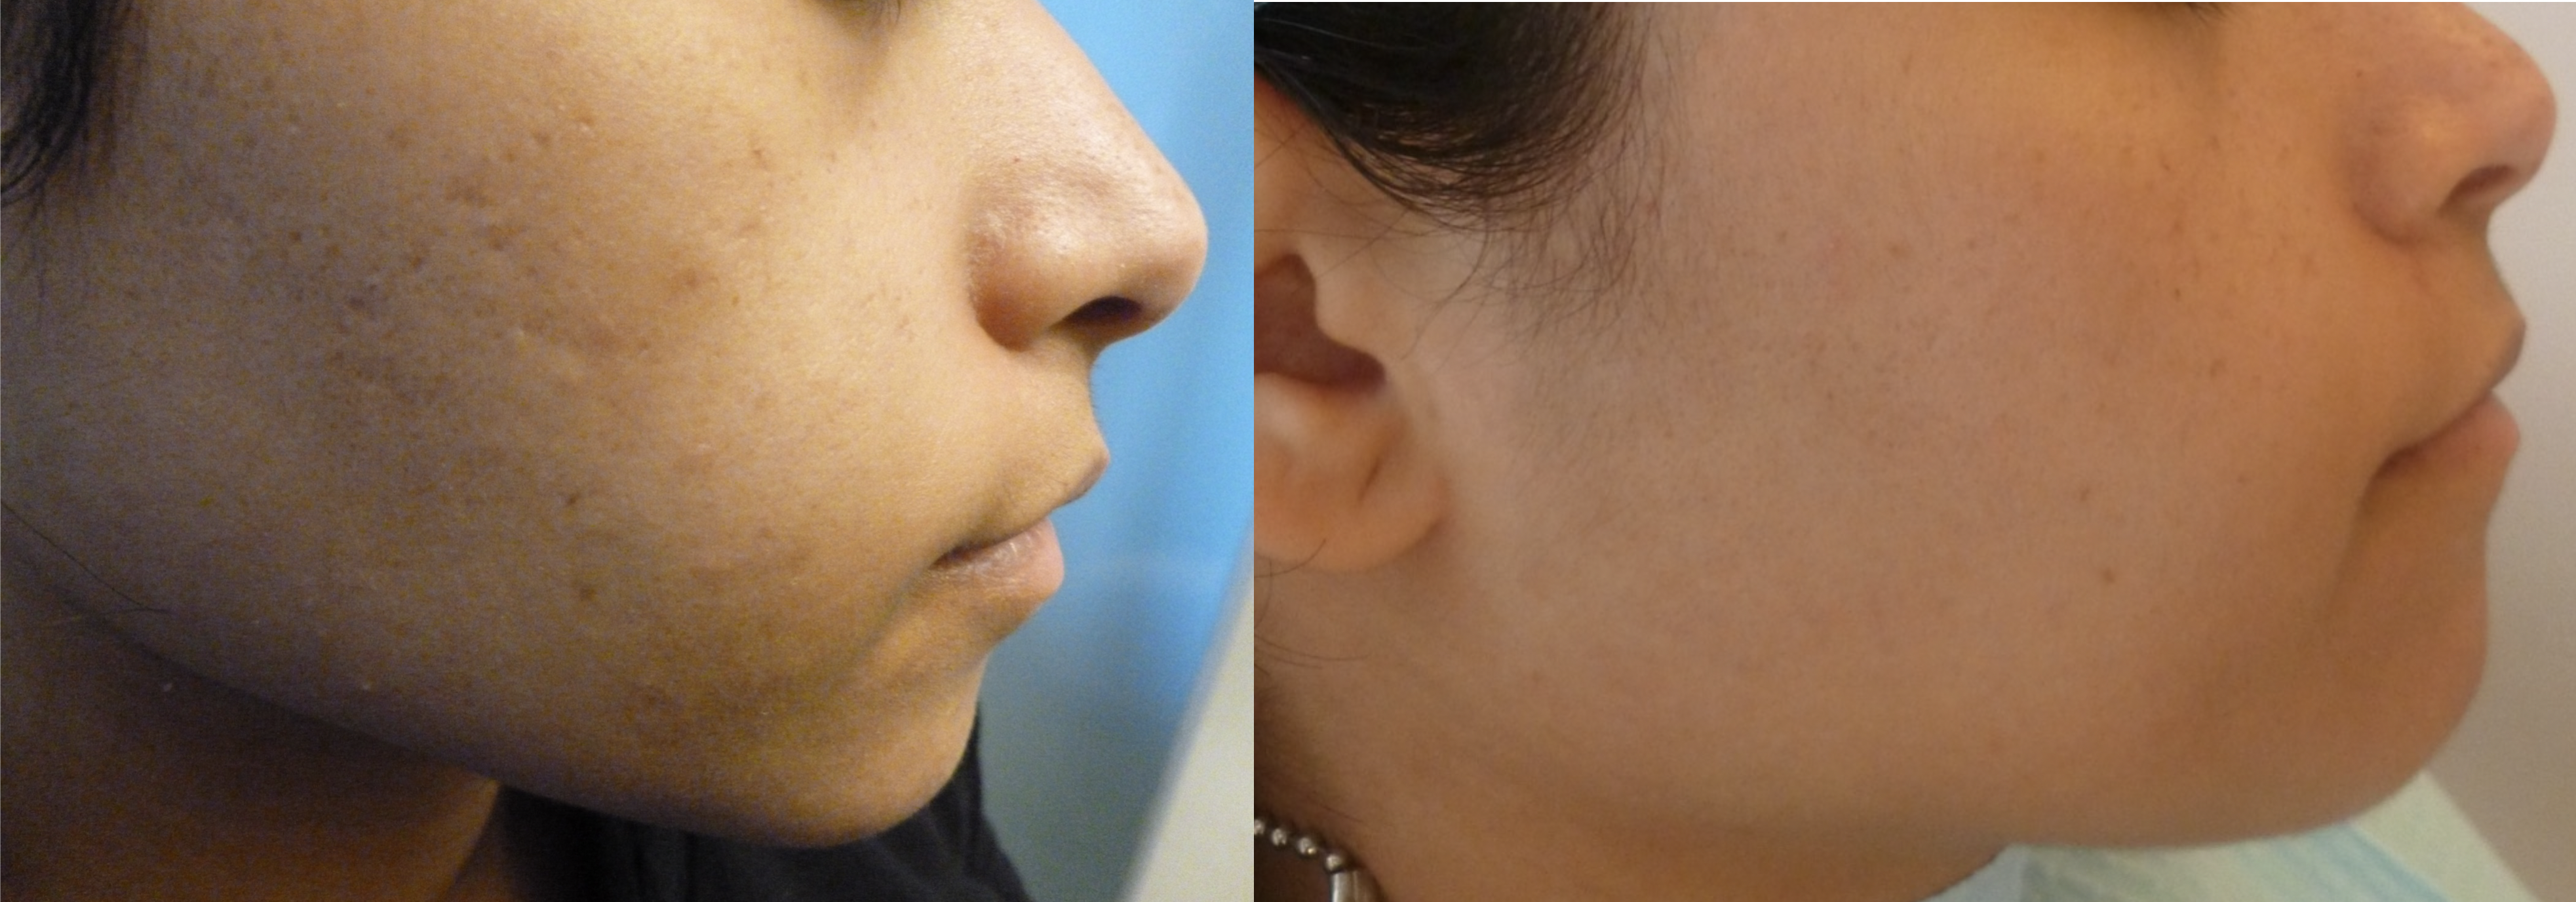 BEFORE FRAXEL – ACNE SCARRING (LEFT), 1 MONTH POST AFTER FRAXEL #4 (RIGHT)